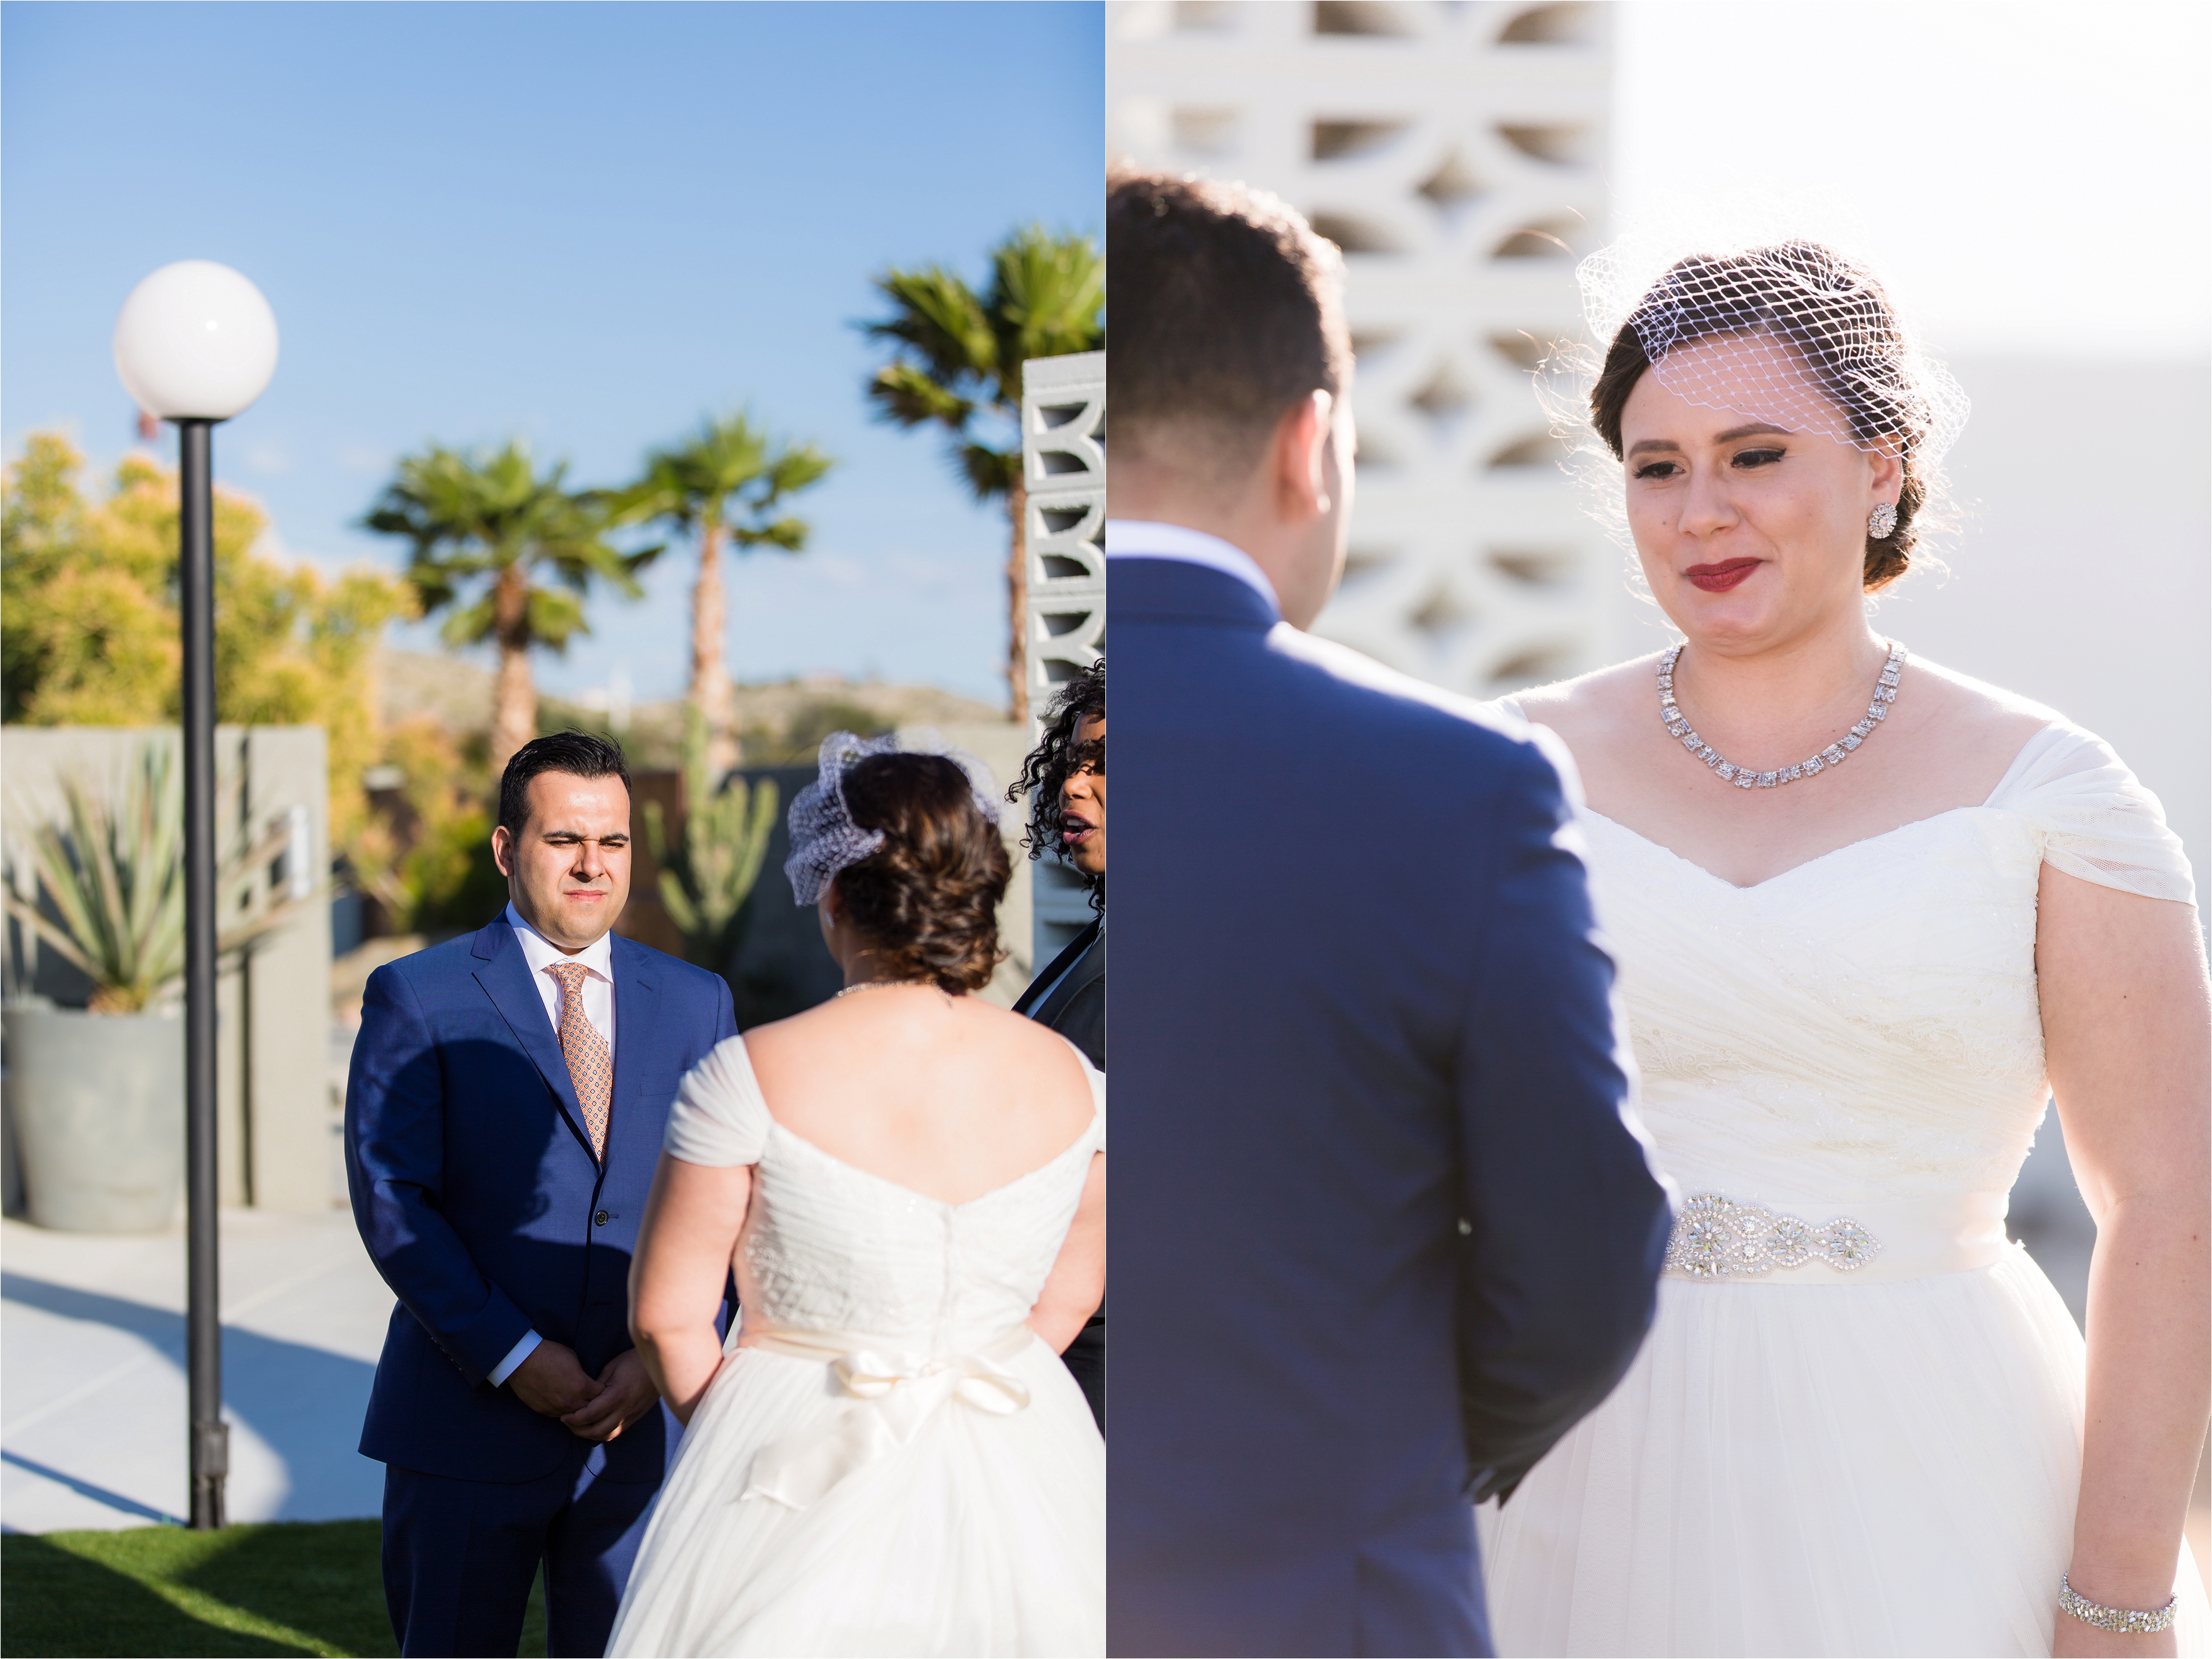 Bride and groom gazing emotionally into each other's eyes during ceremony